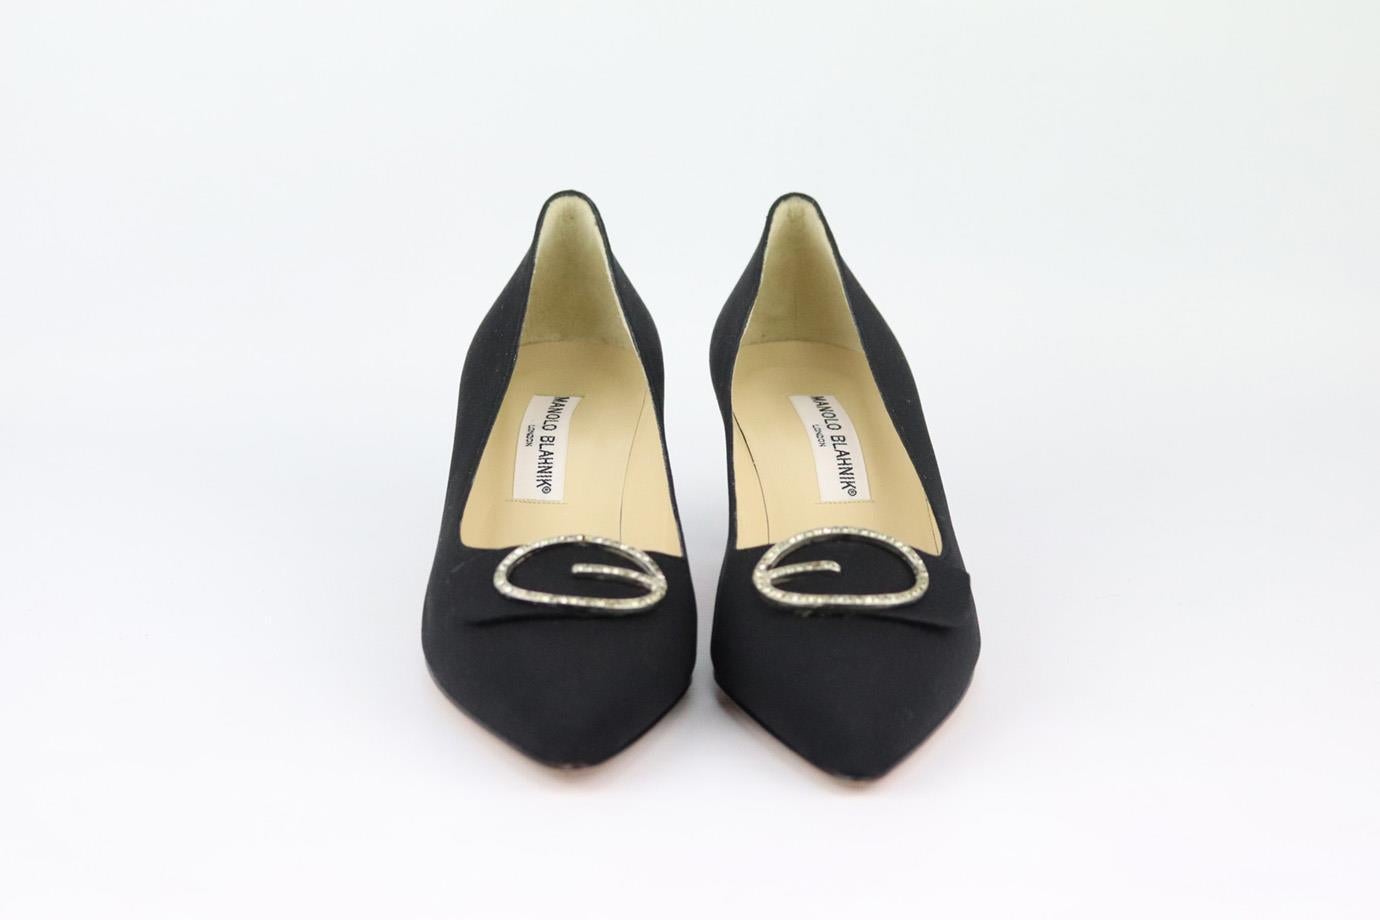 These pumps by Manolo Blahnik are a classic style that will never date, made in Italy from textured black grosgrain, they have pointed toes, embellished buckle and comfortable 38 mm heels to take you from morning meetings to dinner with friends.